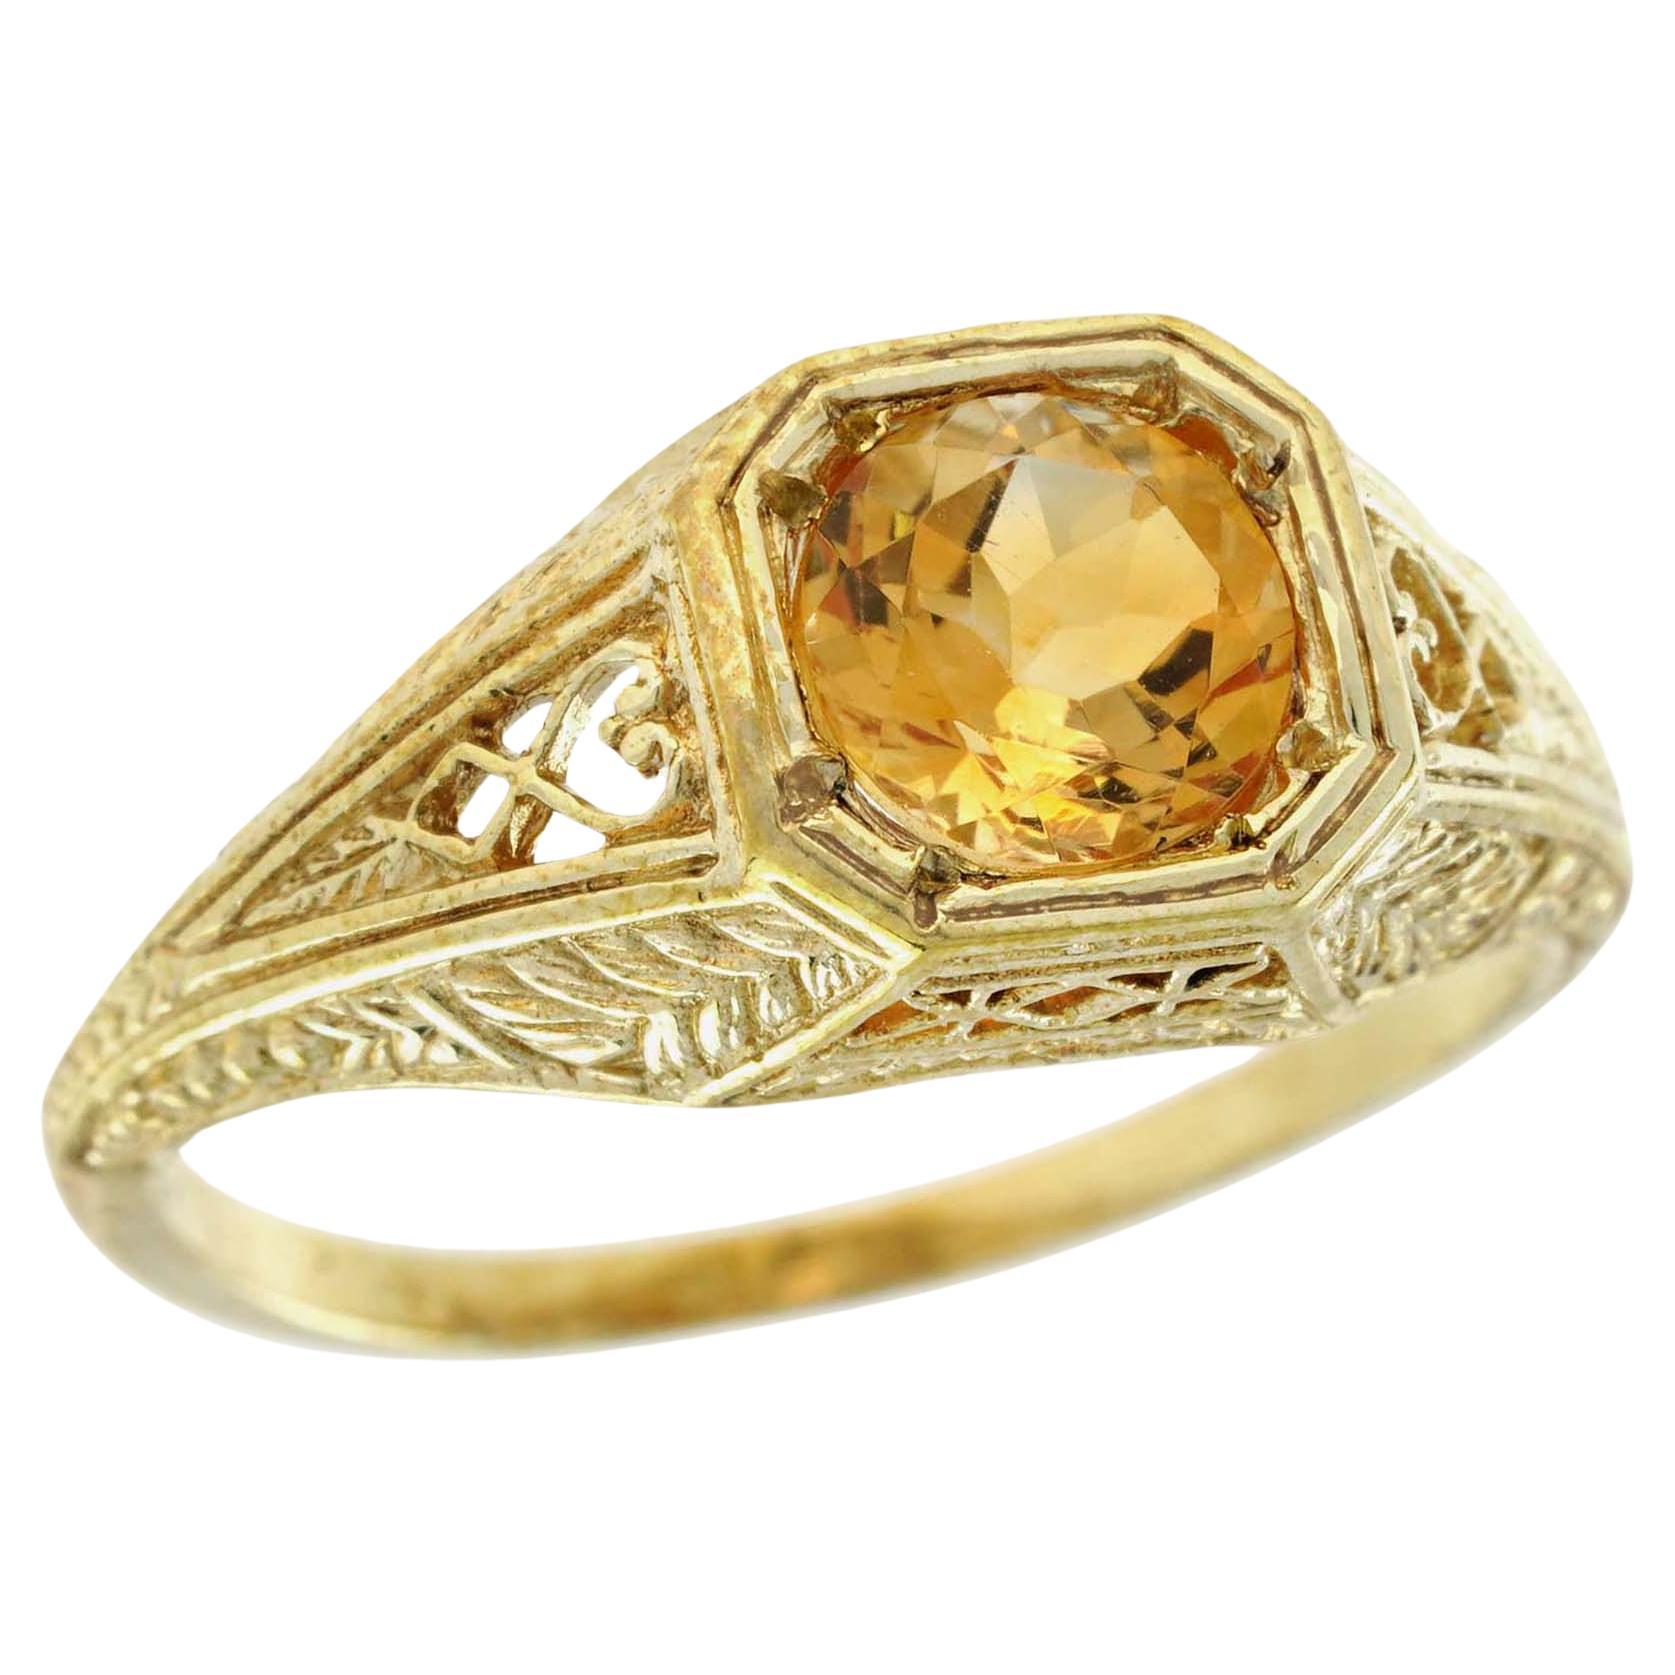 For Sale:  Natural Citrine Vintage Style Filigree Ring in Solid 9K Yellow Gold